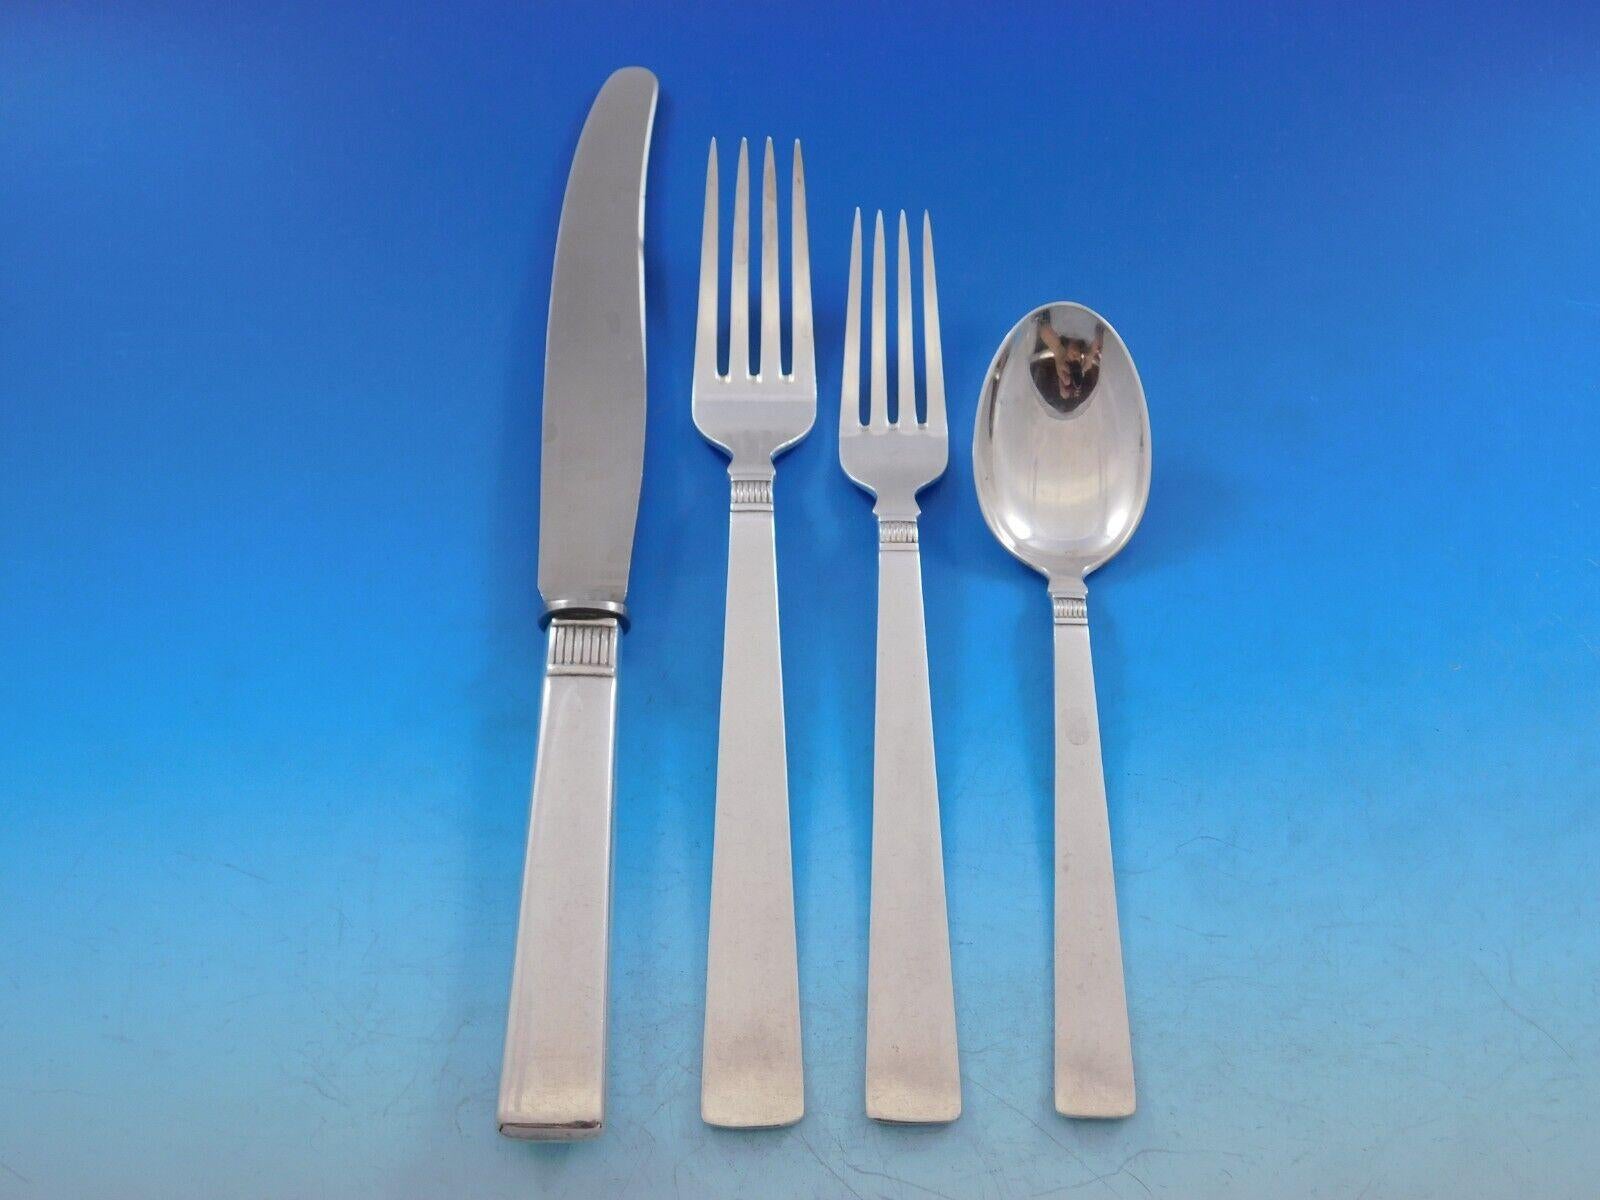 Monumental gorgeous Prince Harald by Marthinsen (Norway) 830 silver flatware set - 96 pieces. Simple and Modern Scandinavian service. This set includes:

8 dinner knives, 9 1/8